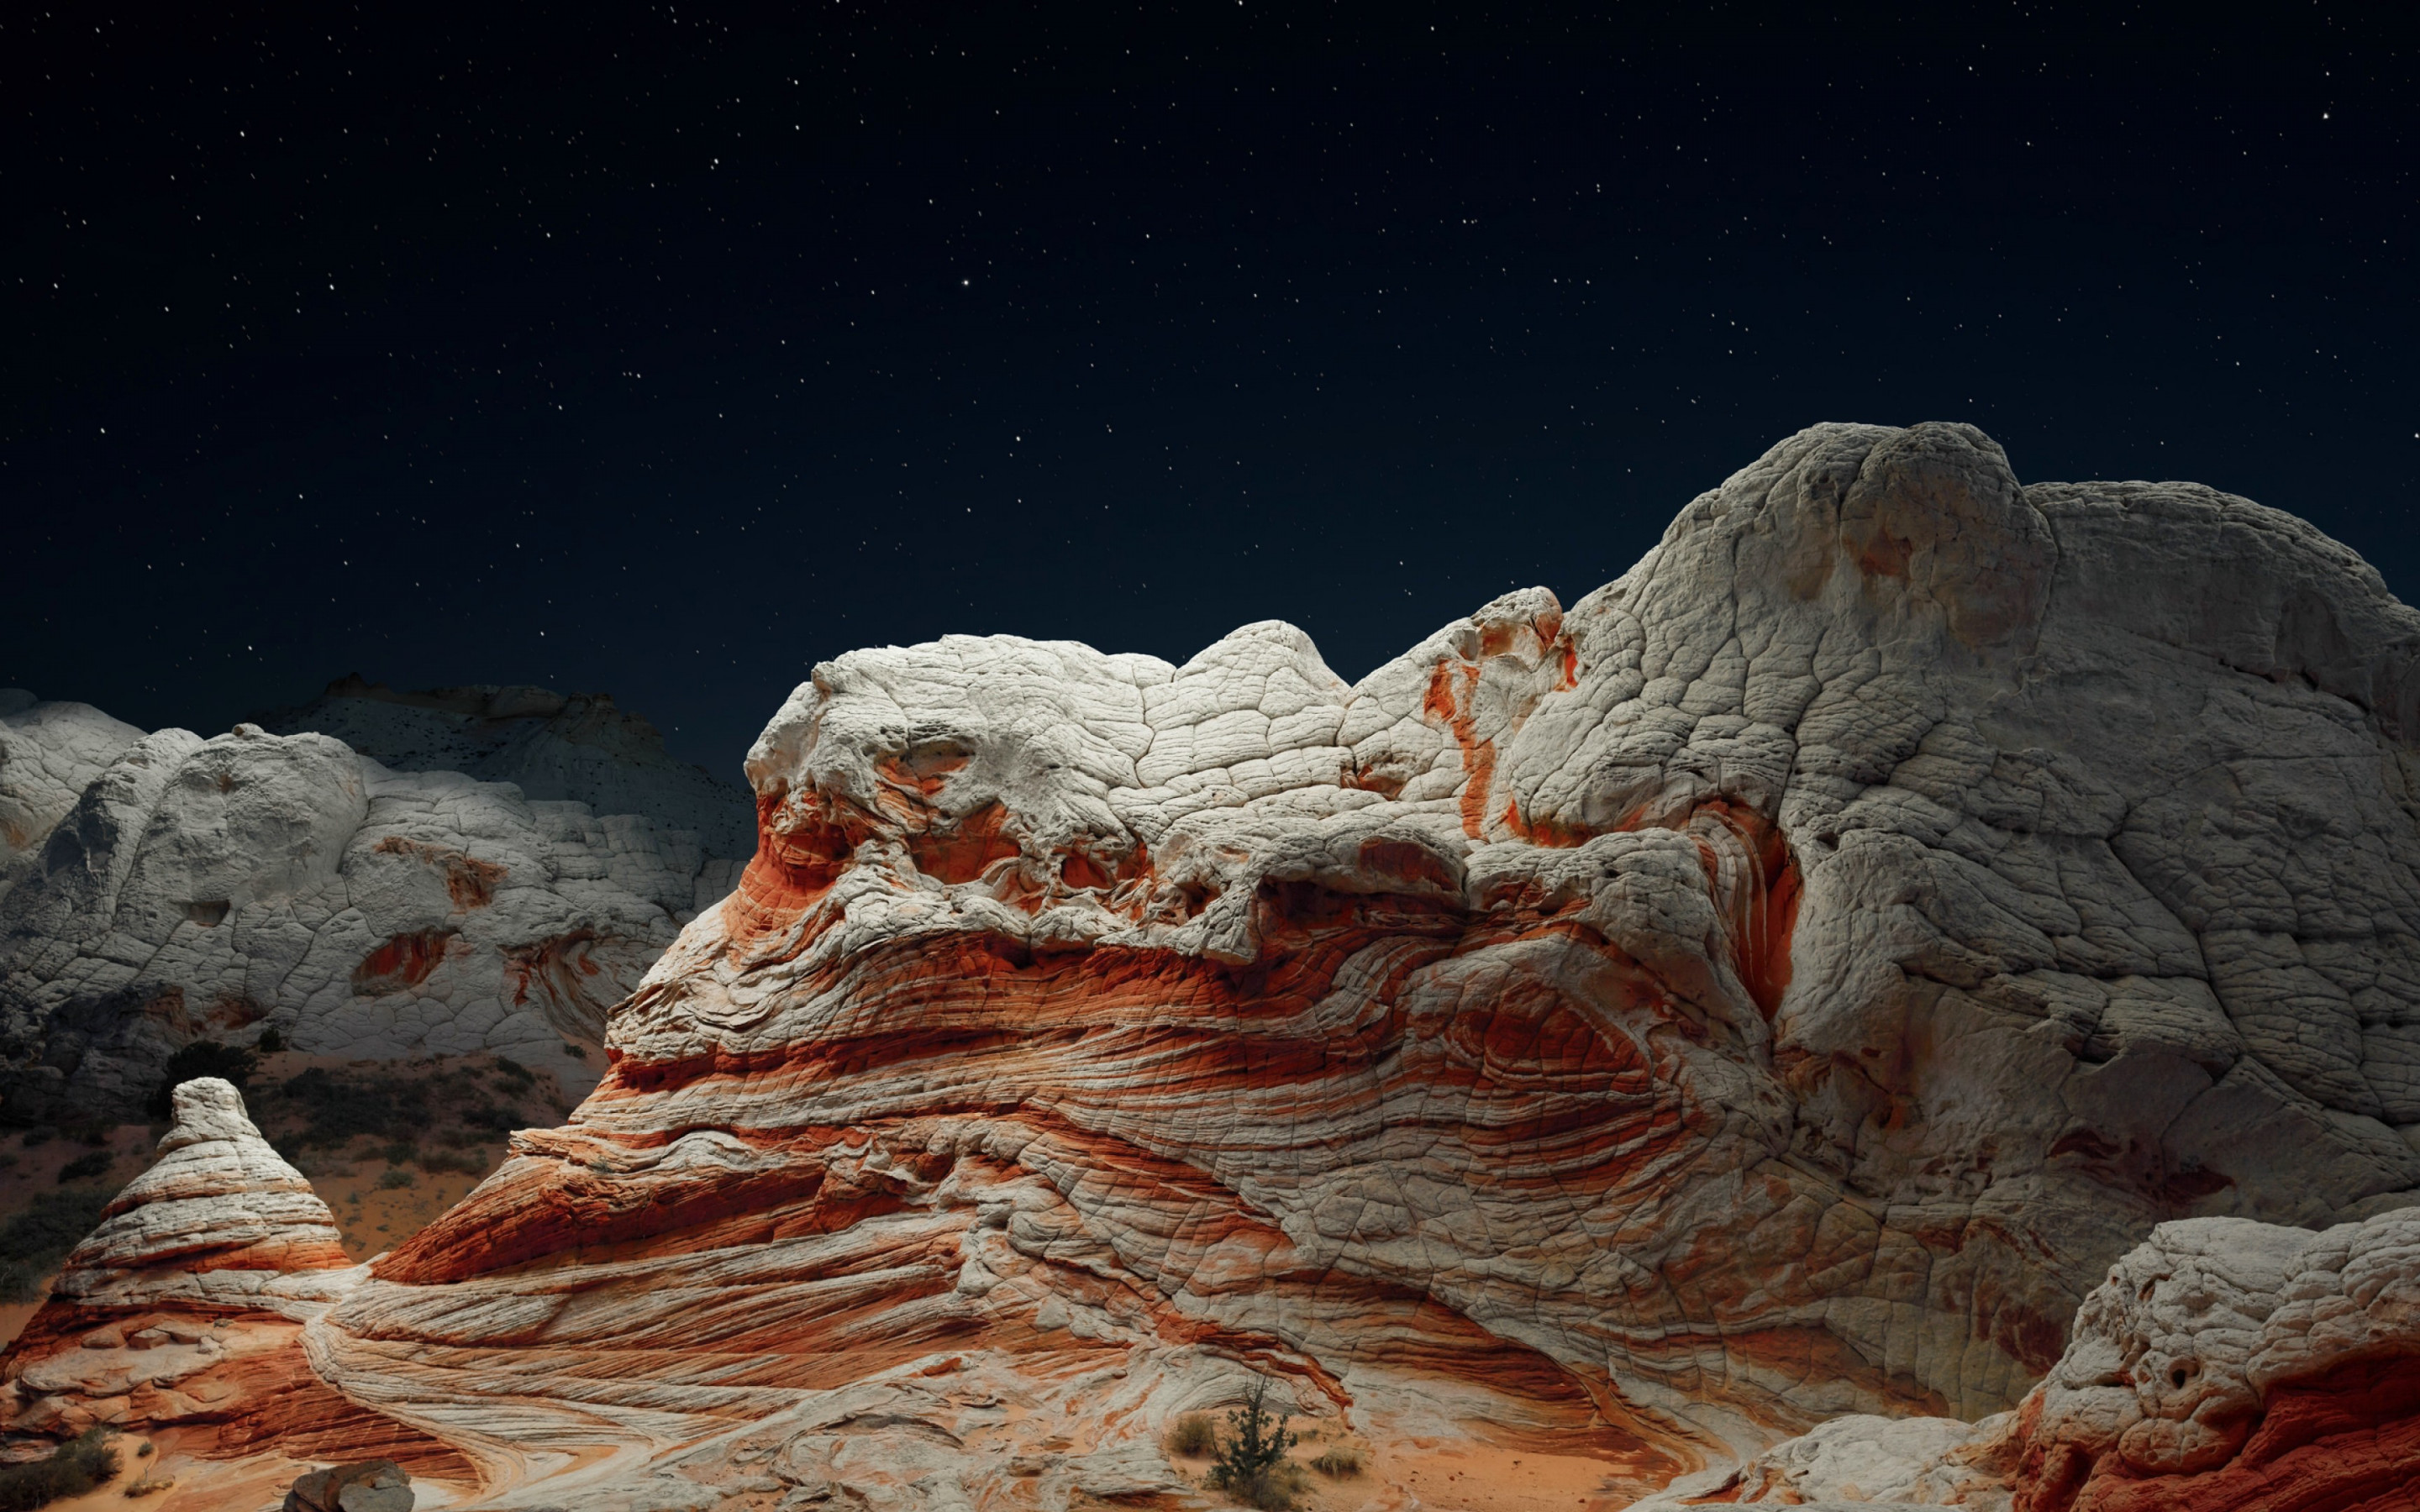 The night sky and desert valley wallpaper 2880x1800